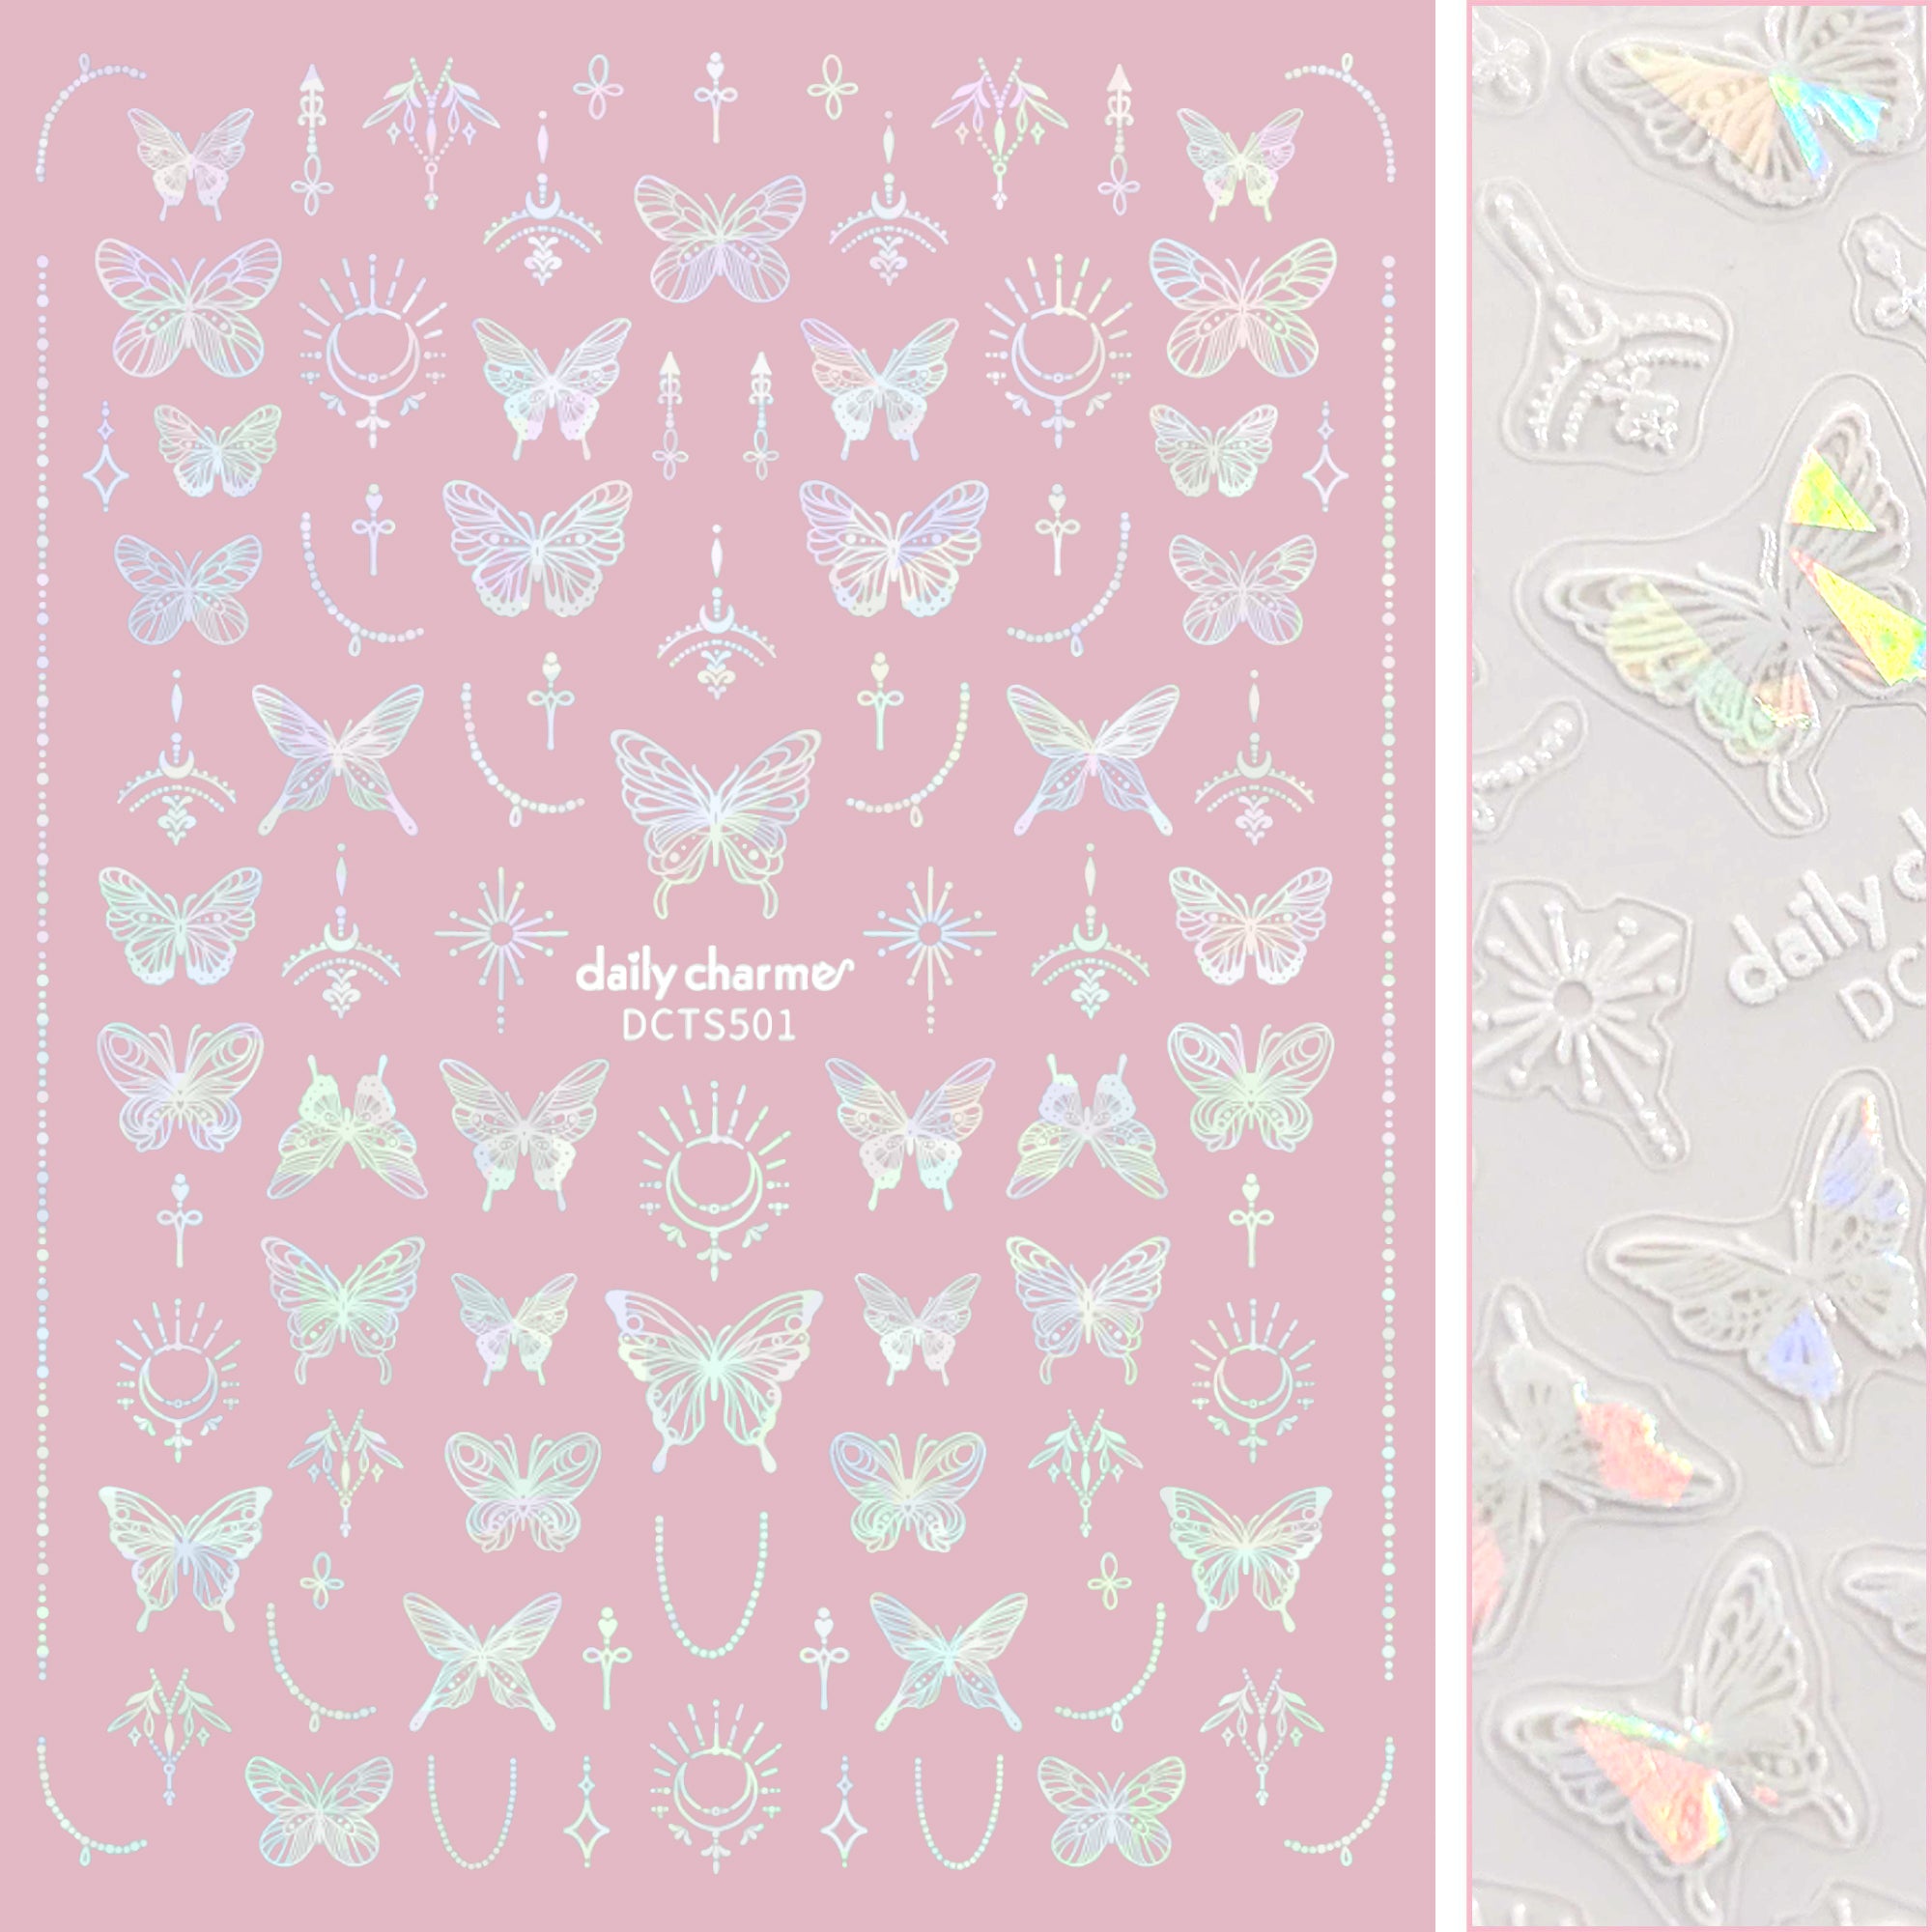 Holographic Butterfly Nail Art Sticker / Whimsical Wings / White